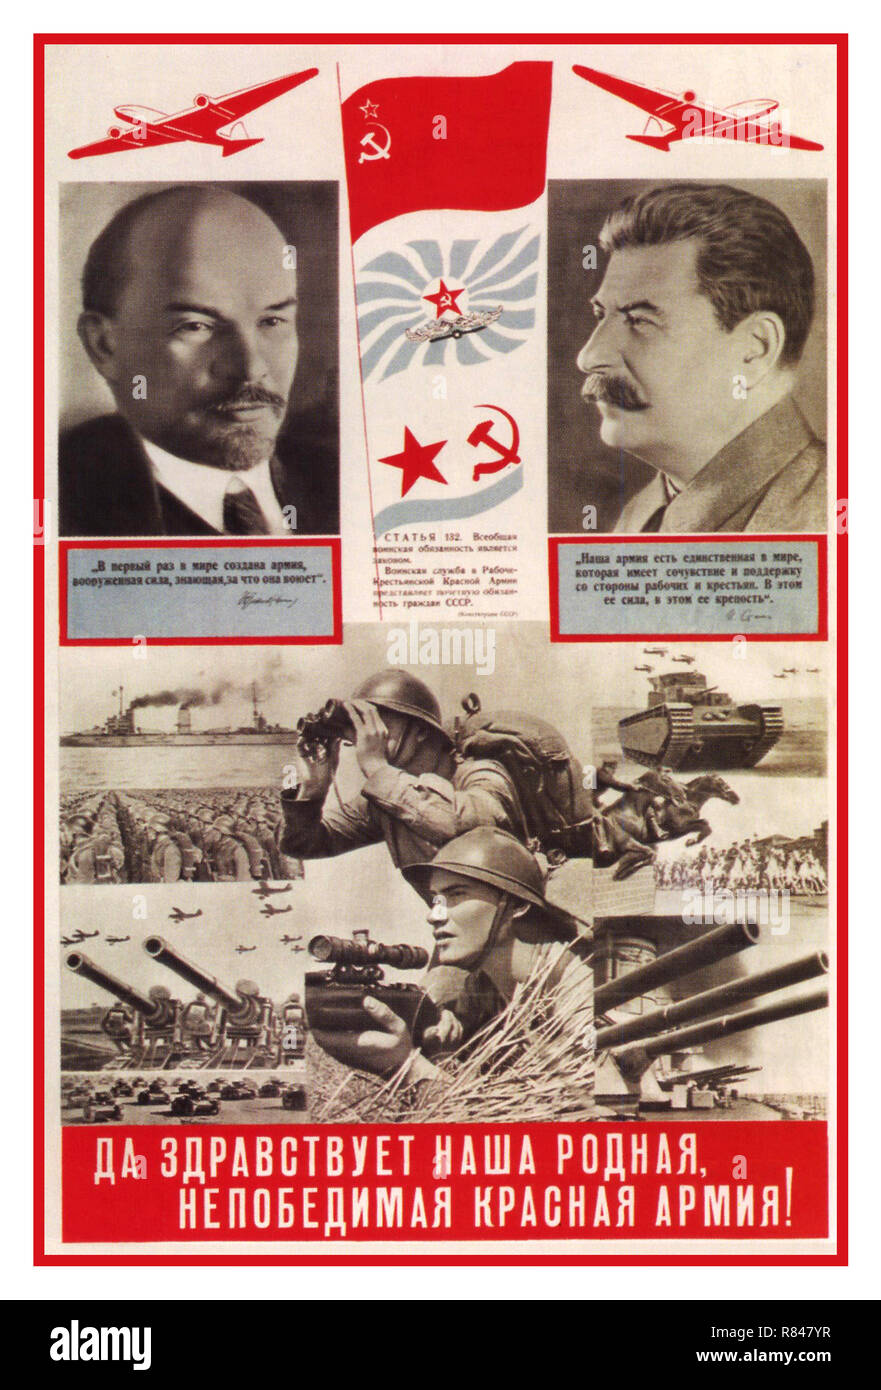 Vintage Soviet USSR Russian WW2 propaganda poster. "Long live our Dear and Invincible Red Army!"  Poster produced 1939 at the beginning of World War II featuring Lenin and Stalin as brave leaders in the face of aggression Images portray soldiers, cavalry, tanks, ships, and aircraft  vigilant and battle-ready as Europe gears up for World War 2 Stock Photo